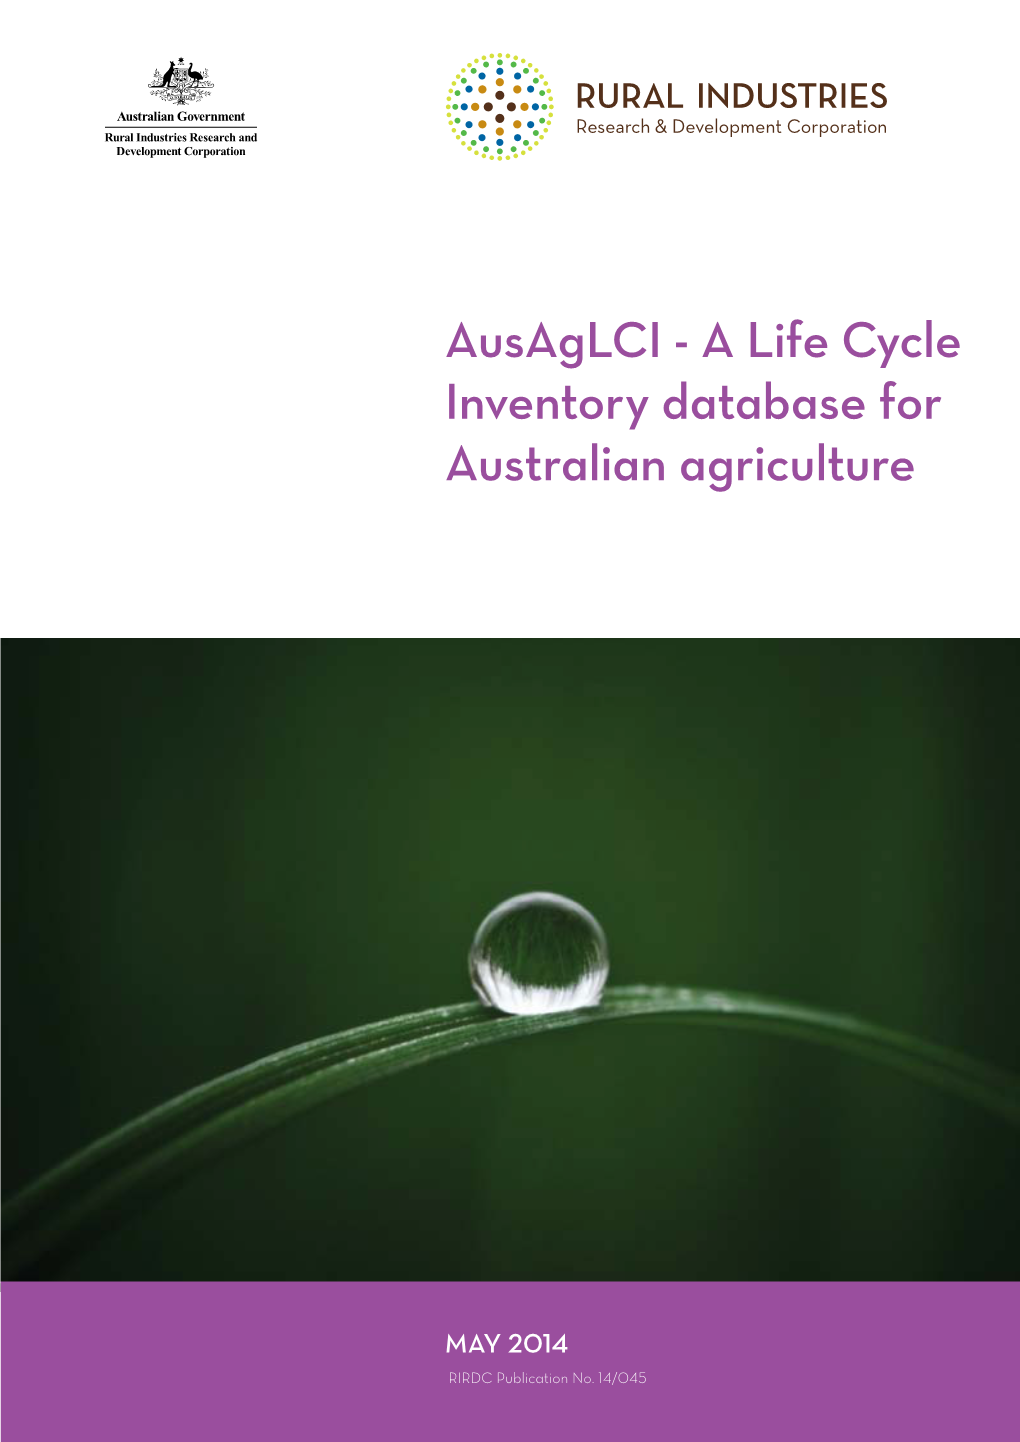 Ausaglci - a Life Cycle Inventory Database for Australian Agriculture